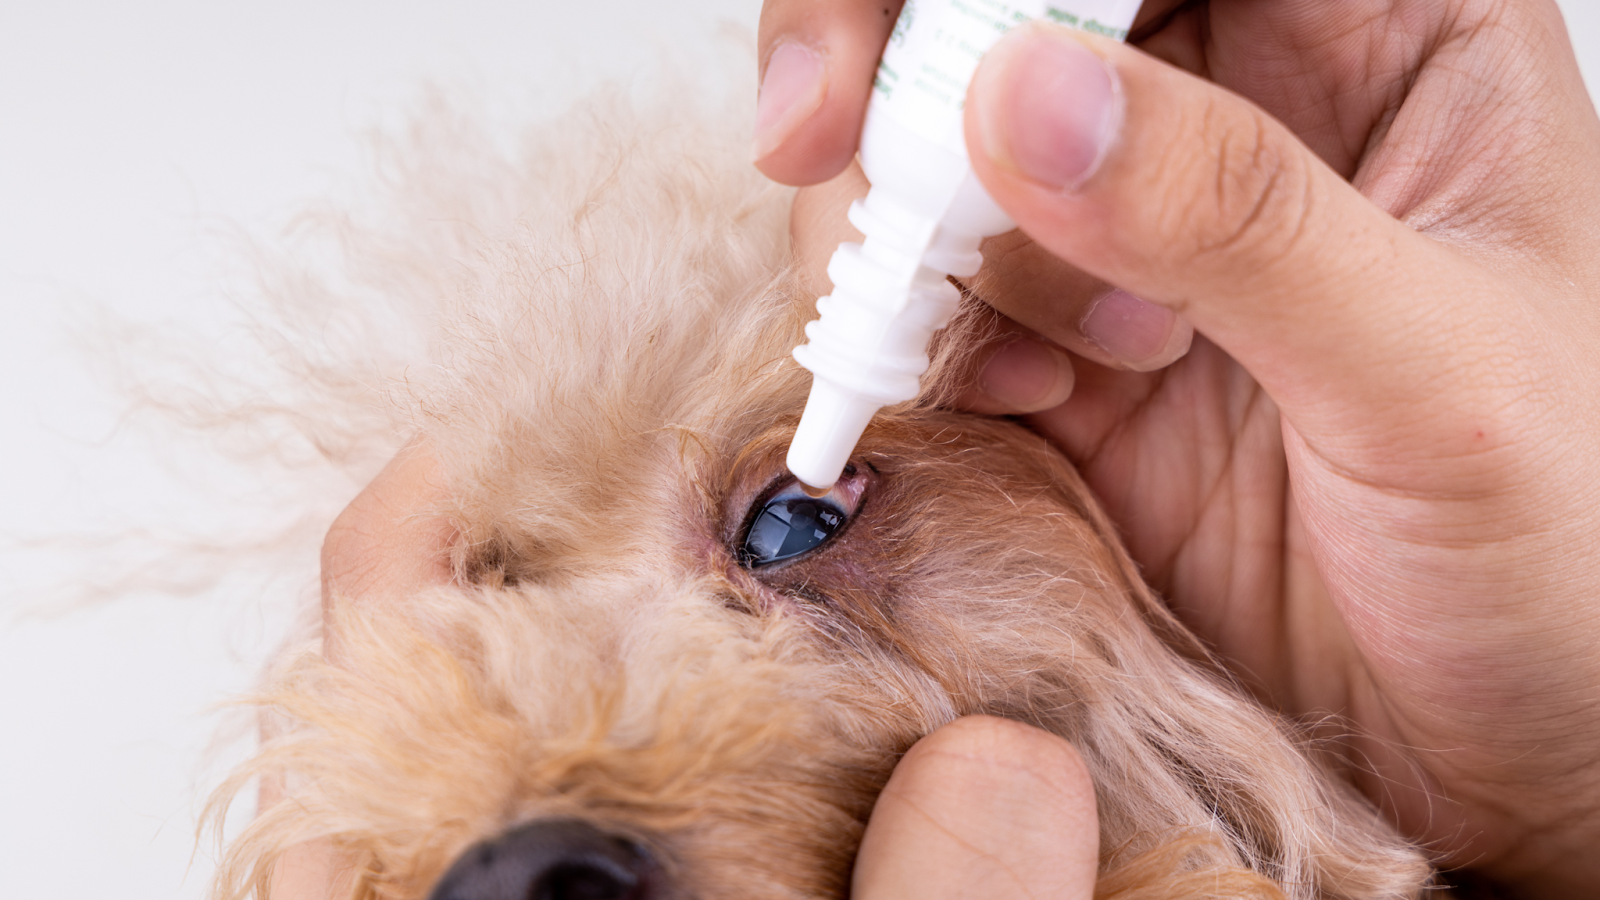 Eye drops can help keep your dog's eyes moist and decrease inflammation before and after surgery.